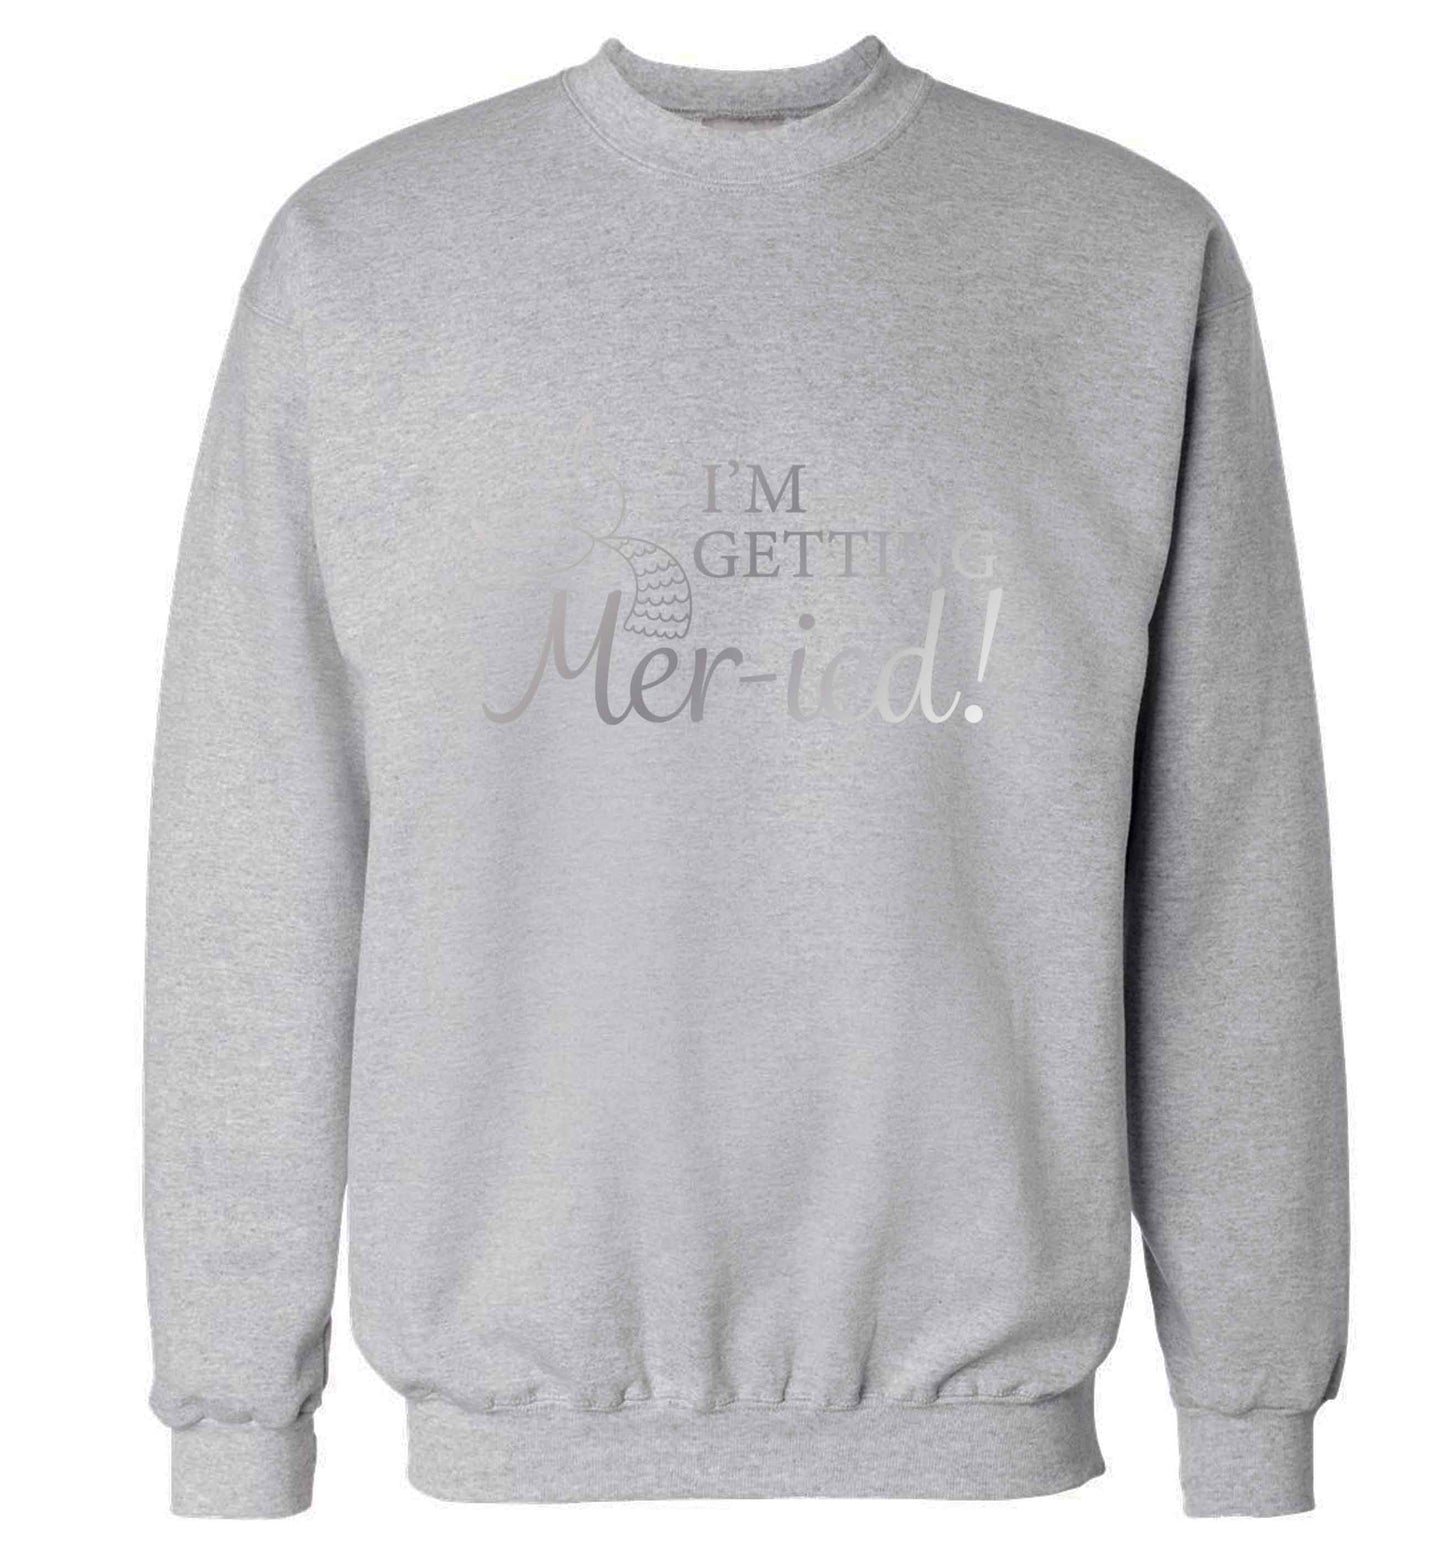 Personalised wedding thank you's Mr and Mrs wedding and date! Ideal wedding favours! adult's unisex grey sweater 2XL